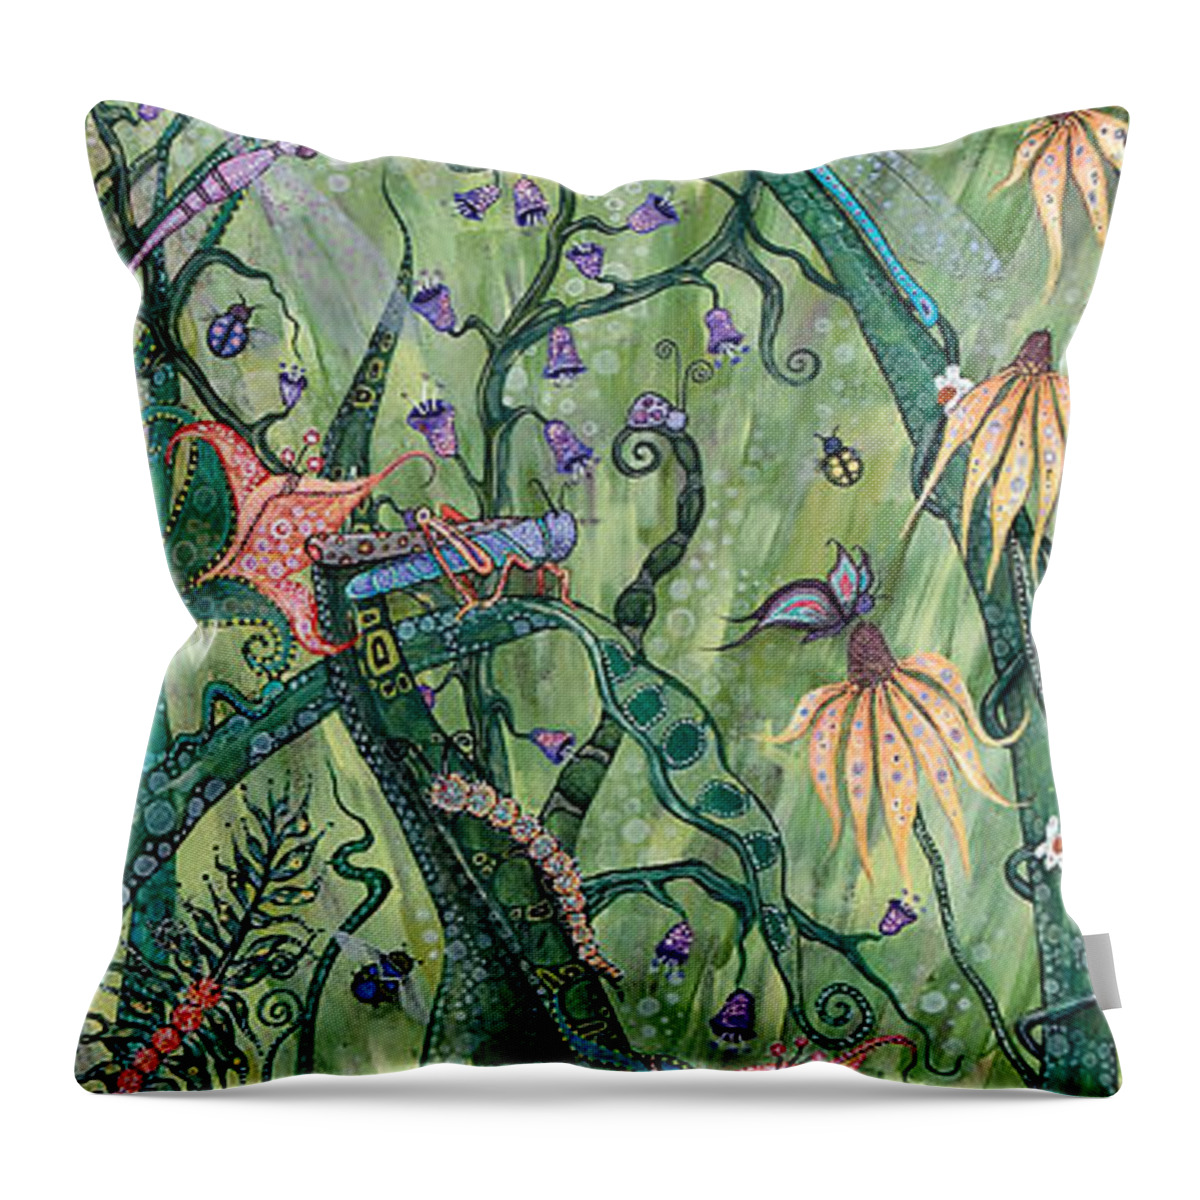 Flowers And Butterflies And Dragonflies On Green Background Throw Pillow featuring the painting Serendipity by Tanielle Childers